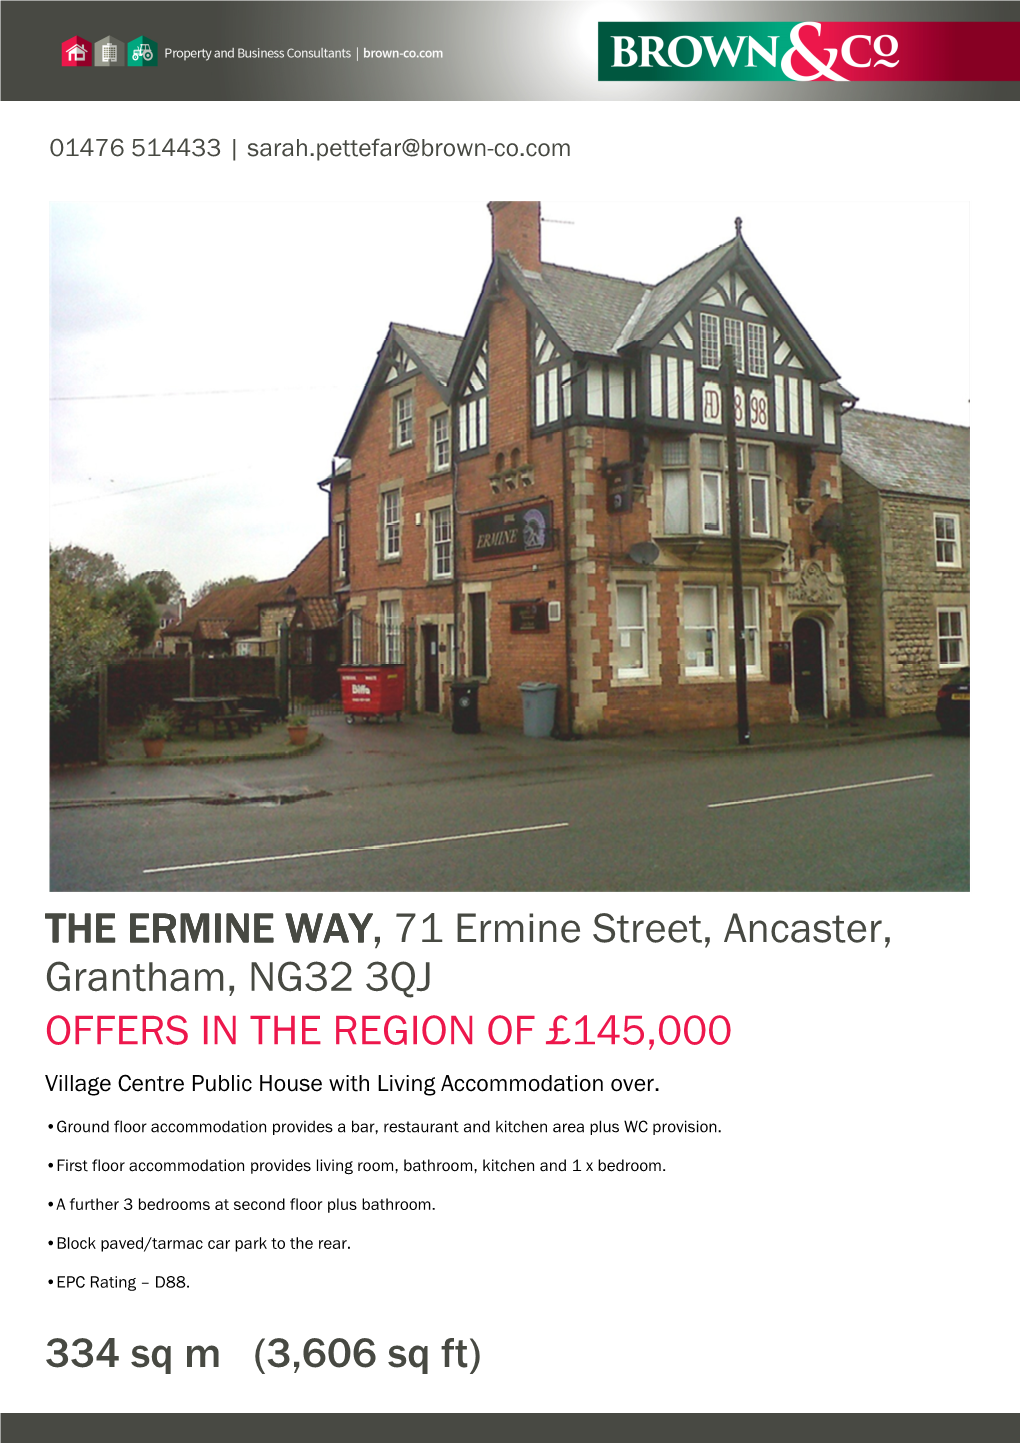 THE ERMINE WAY the ERMINE WAY, 71 Ermine Street, Ancaster, Grantham, NG32 3QJ OFFERS in the REGION of £145000 334 Sq M